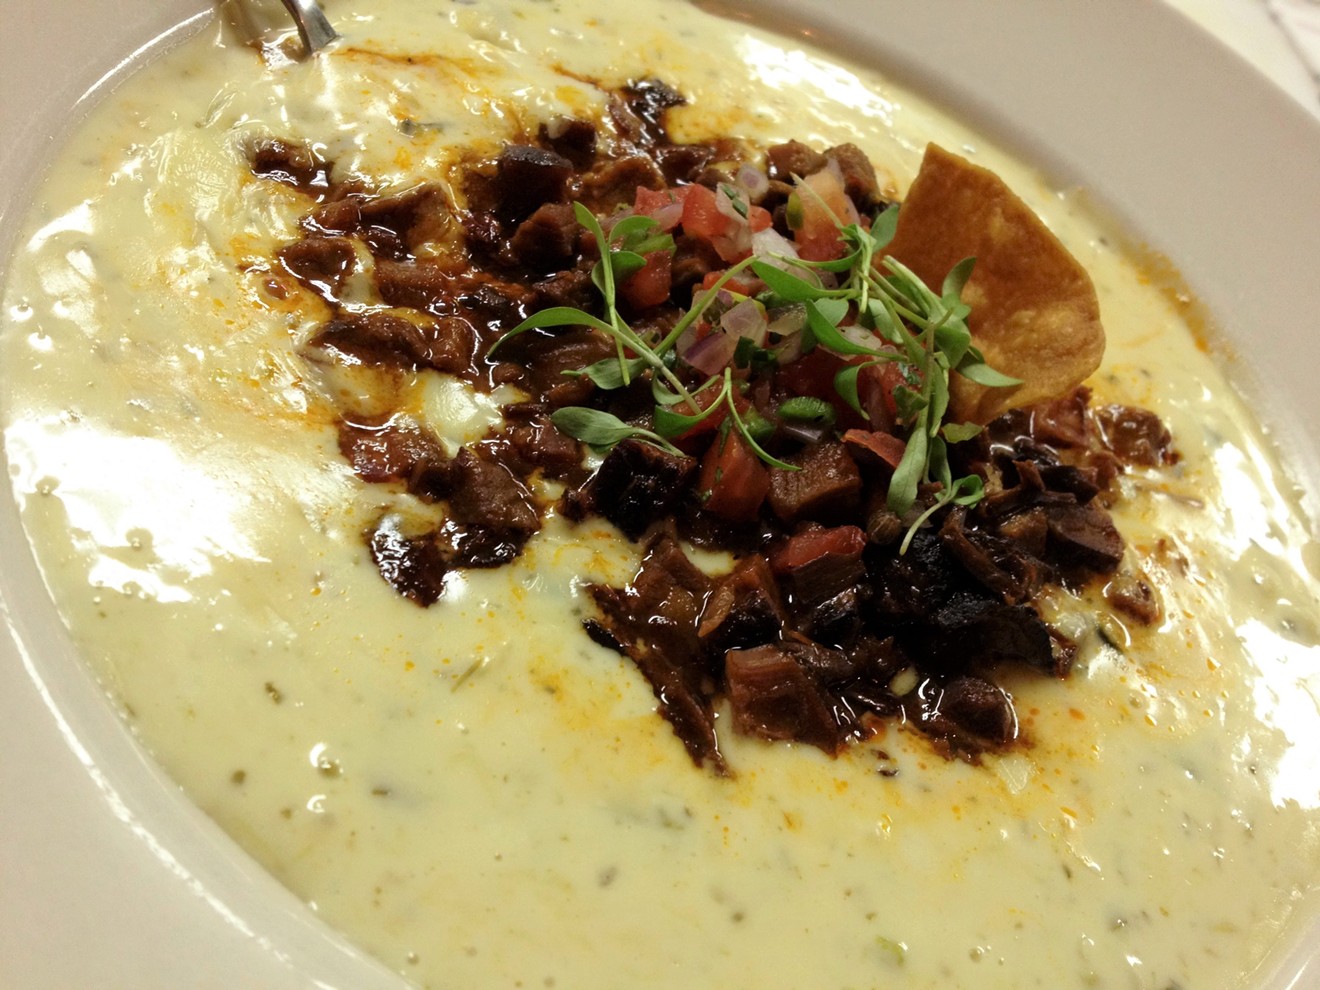 Watch the game in your 'stros gear and get $2 Knocked Up Queso at Beaver's West.